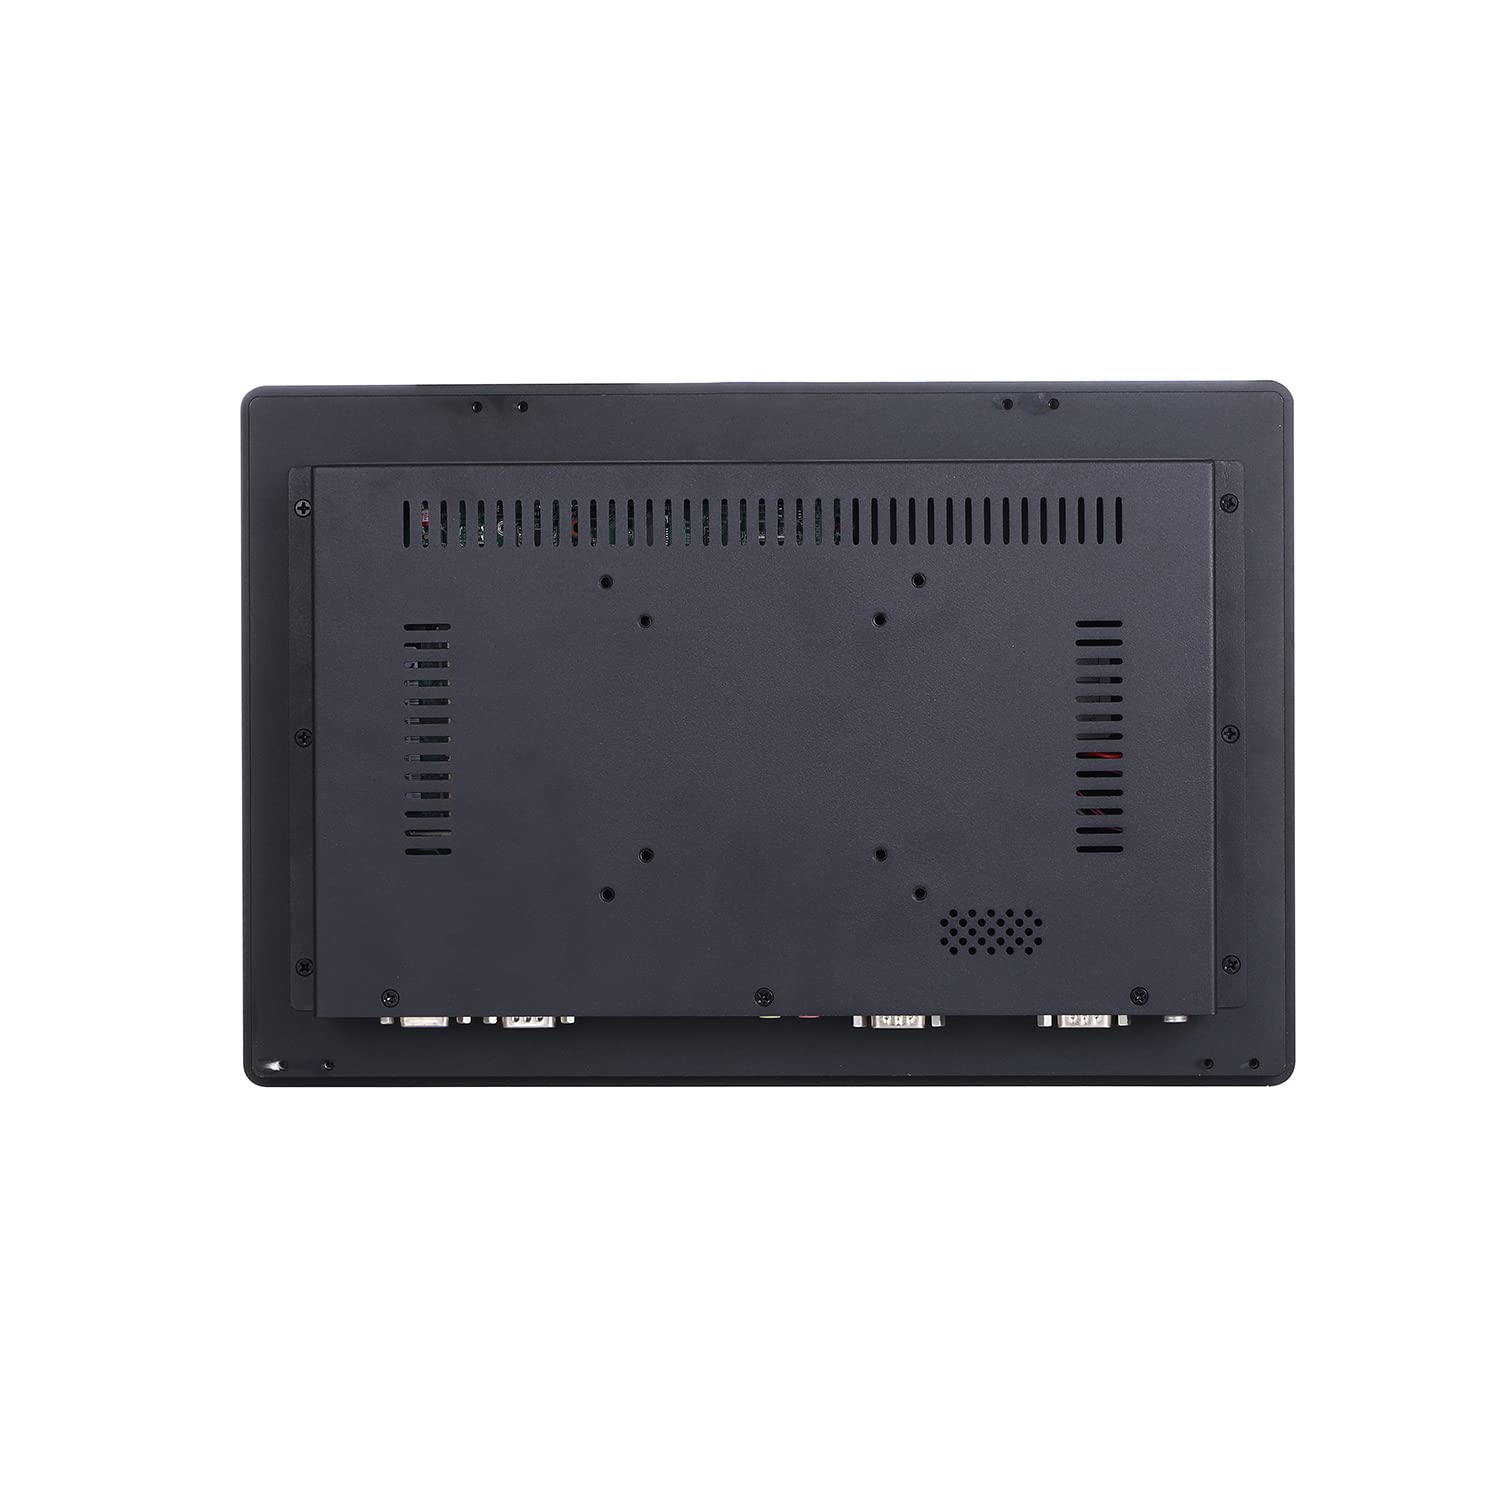 HUNSN 14 Inch TFT LED IP65 Industrial Panel PC, 10-Point Projected Capacitive Touch Screen, Intel J6412, Windows 11 Pro or Linux Ubuntu, PW09, HDMI, 2 x LAN, 3 x COM, 16G RAM, 128G SSD